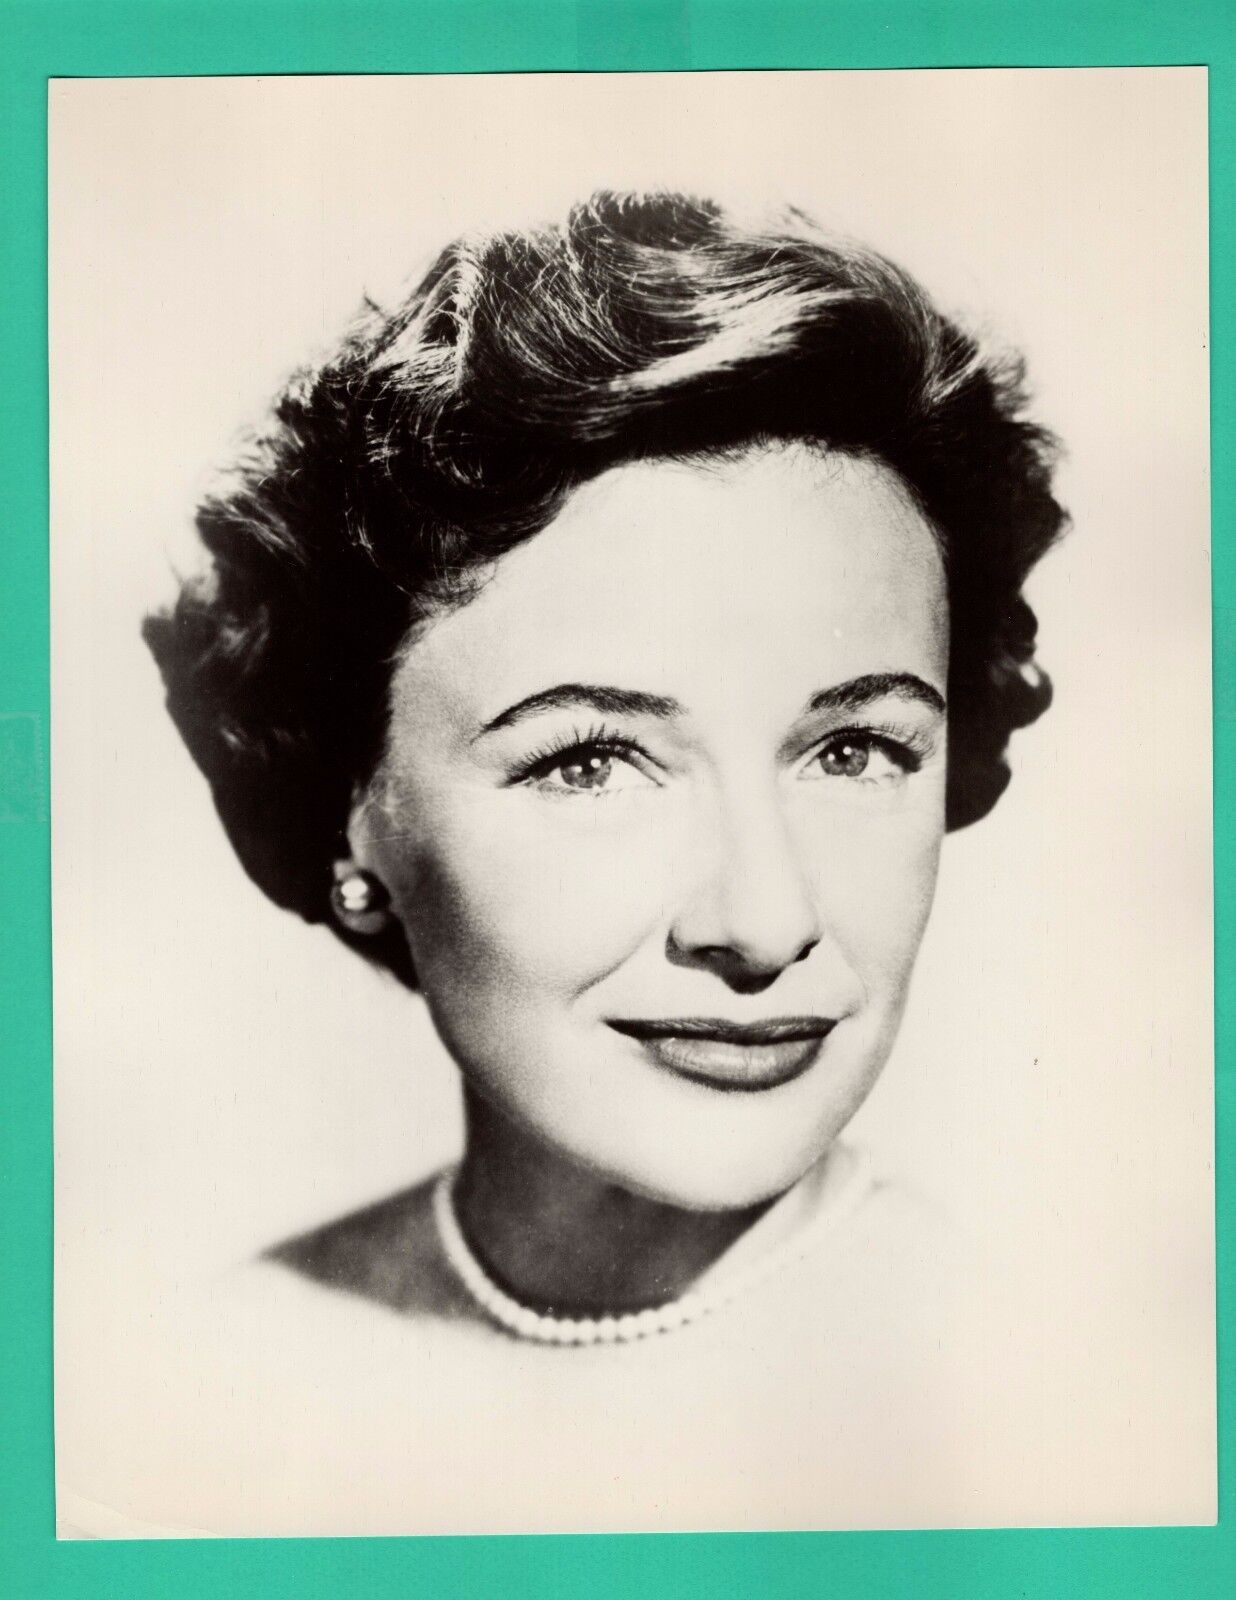 PHYLLIS THAXTER Actress Movie Star Promo 1950's Vintage Photo Poster painting 8x10